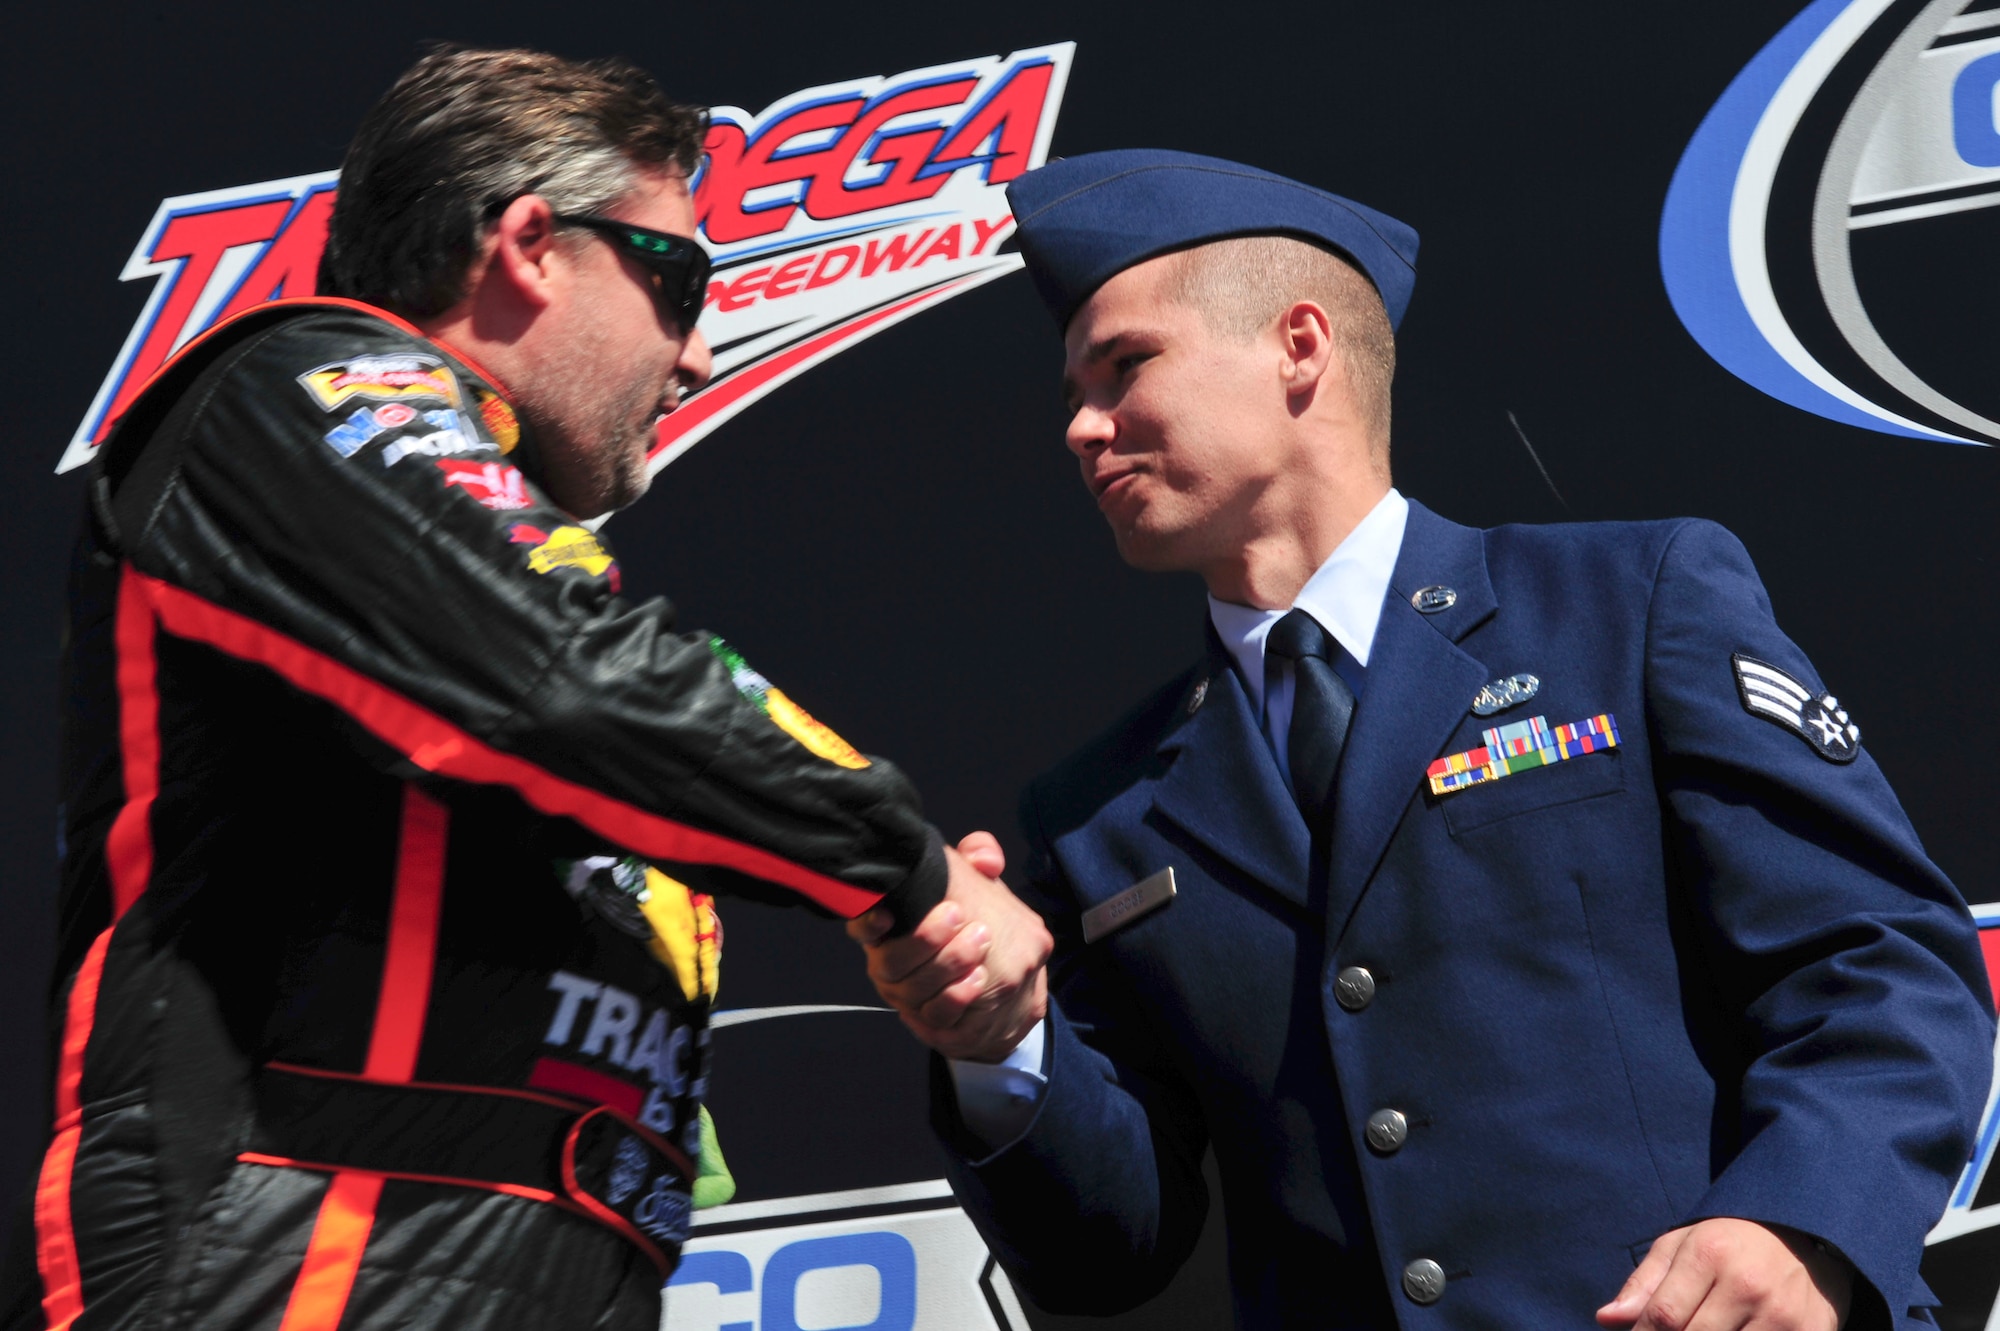 Senior Airman Donald Googe Jr., 42nd Air Base Wing Legal Office paralegal, shakes hands with NASCAR driver Tony Stewart during the Geico 500 Talladega Superspeedway pre-ceremony in Talladega, Ala., Oct. 19, 2014. The ceremony included remarks from special guests and showcased the 43 drivers participating in the race. (U.S. Air Force photo by Airman 1st Class Alexa Culbert) 